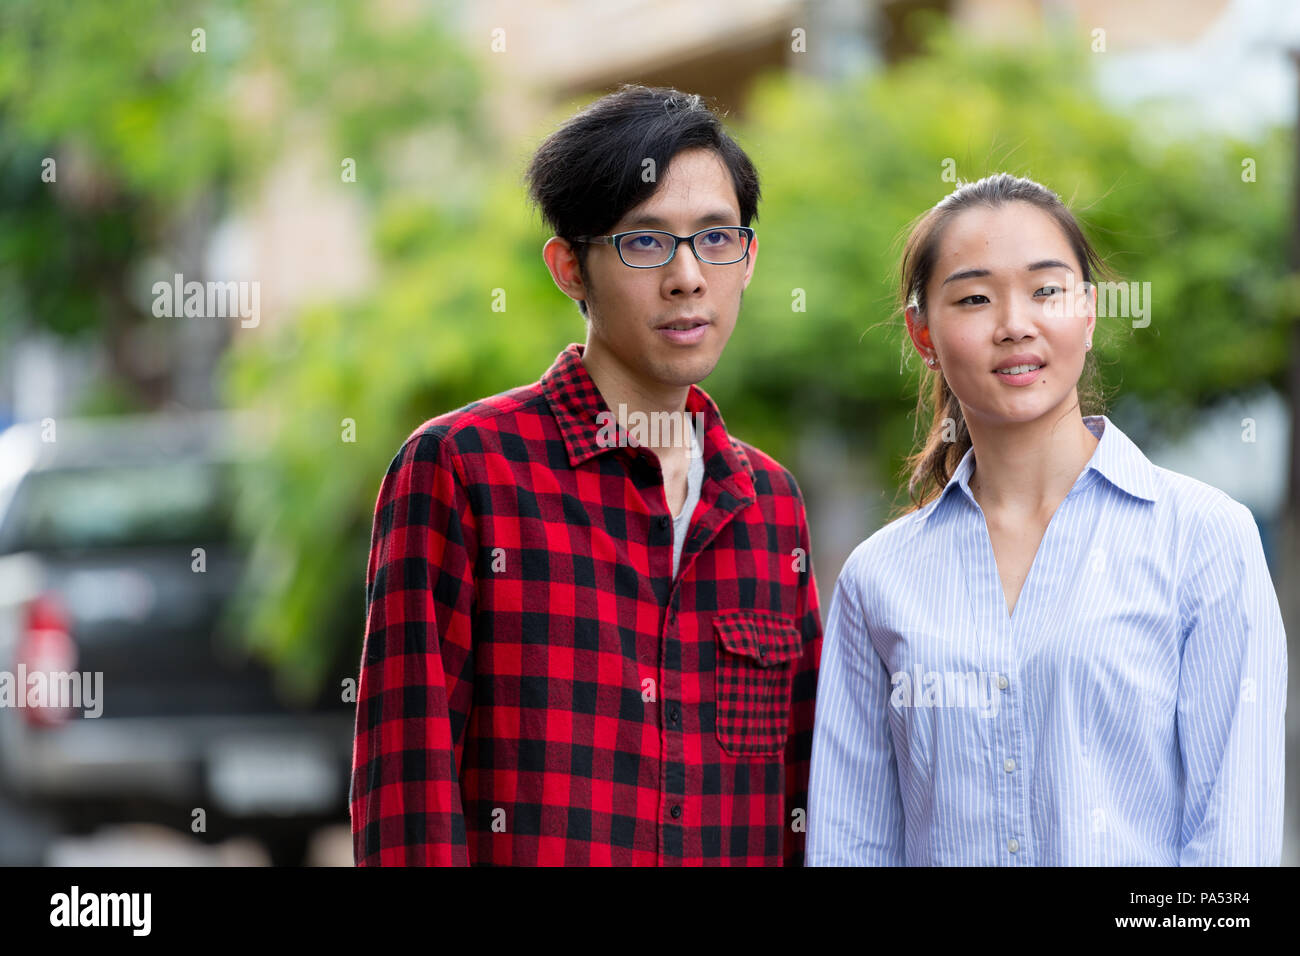 Young Asian couple outdoors Stock Photo